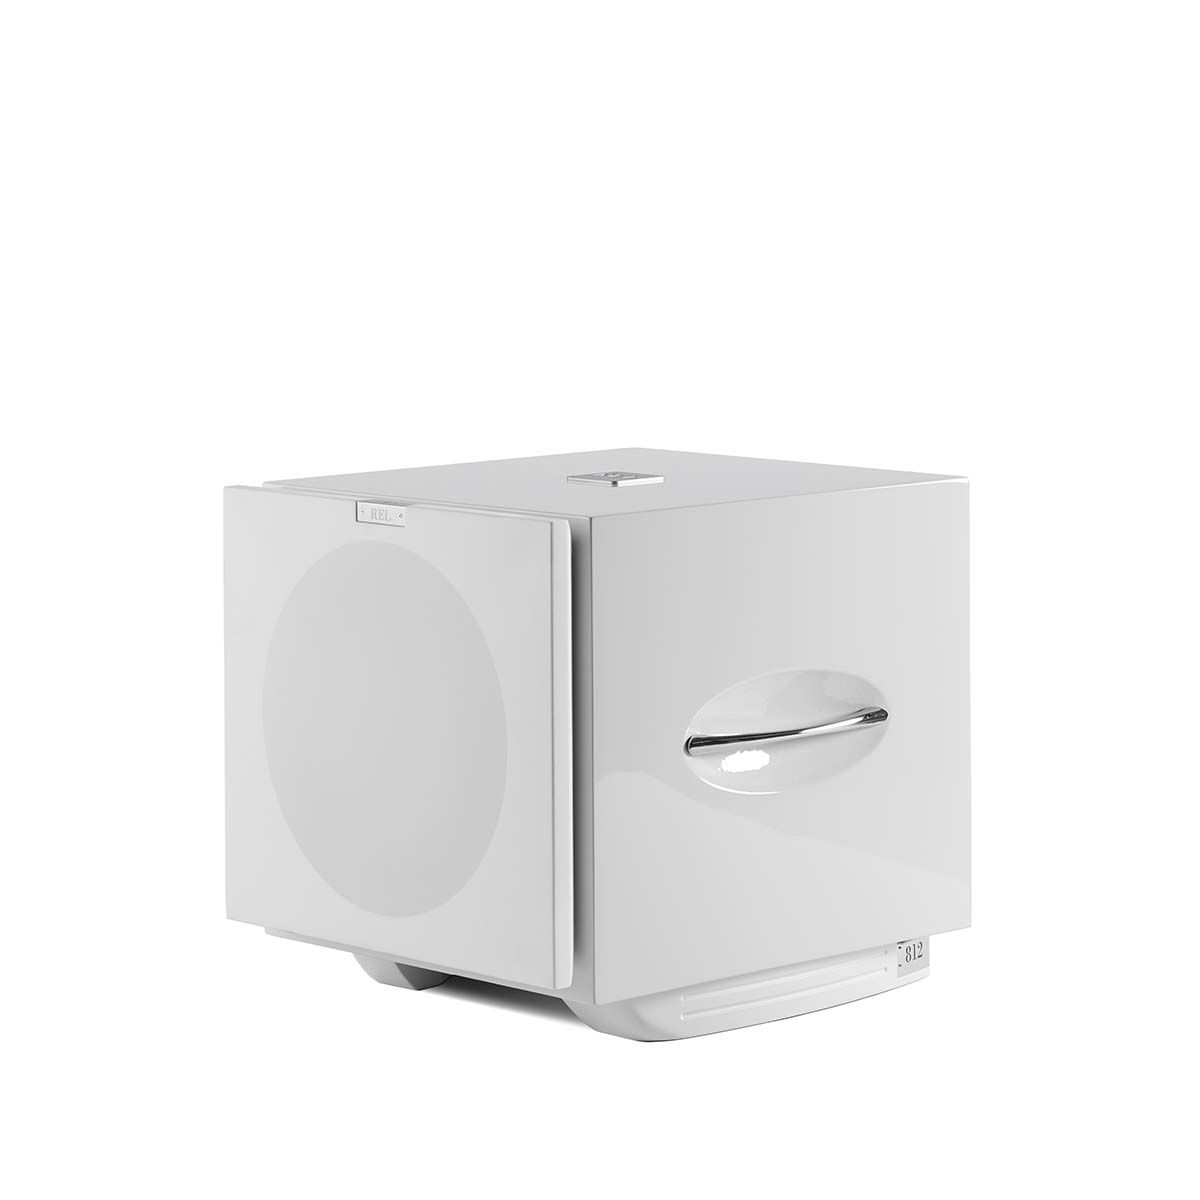 REL Acoustics S/812 Subwoofer, White, front angle with grille